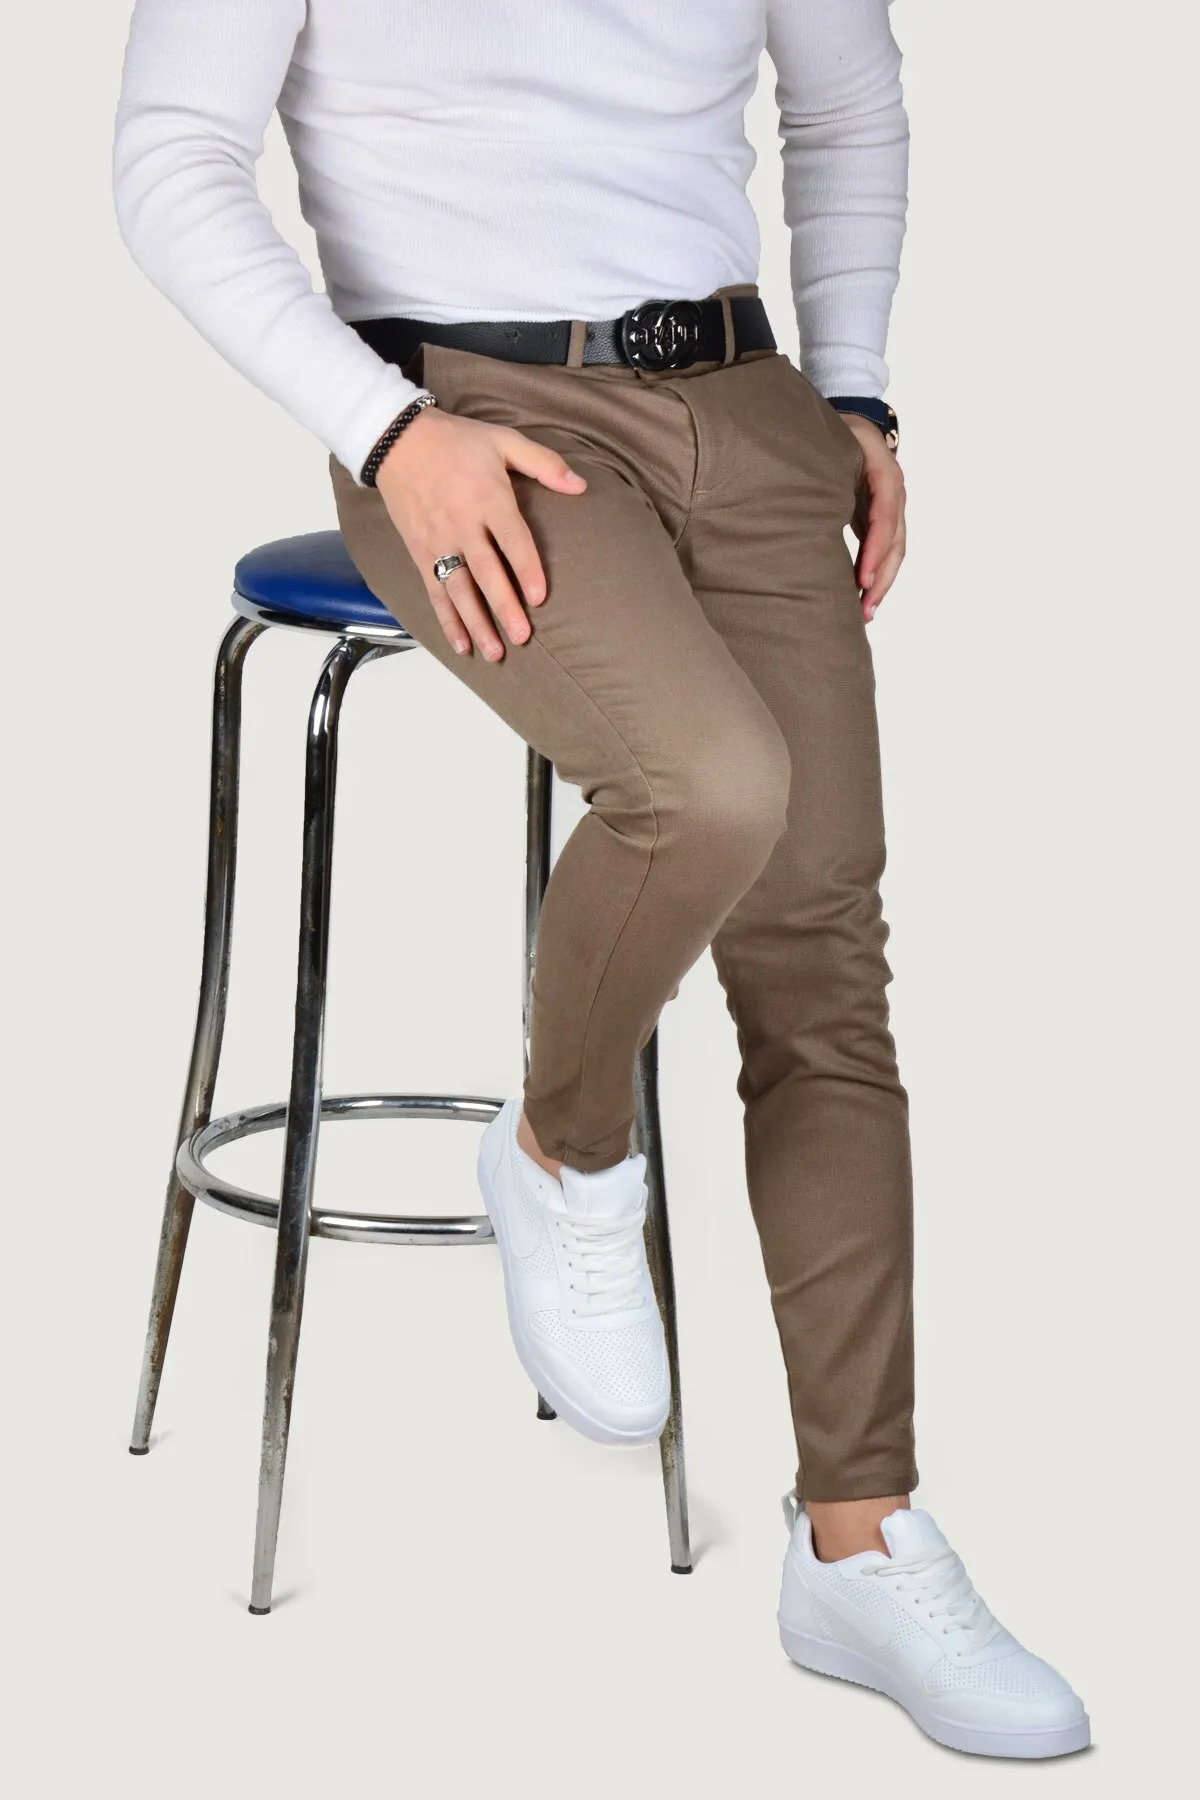 Men's Clothing Overalls Pants Trousers Slim Fit Linen For Office & Work Flexible Comfortable Tight-Fitting Stylish Smart Casual